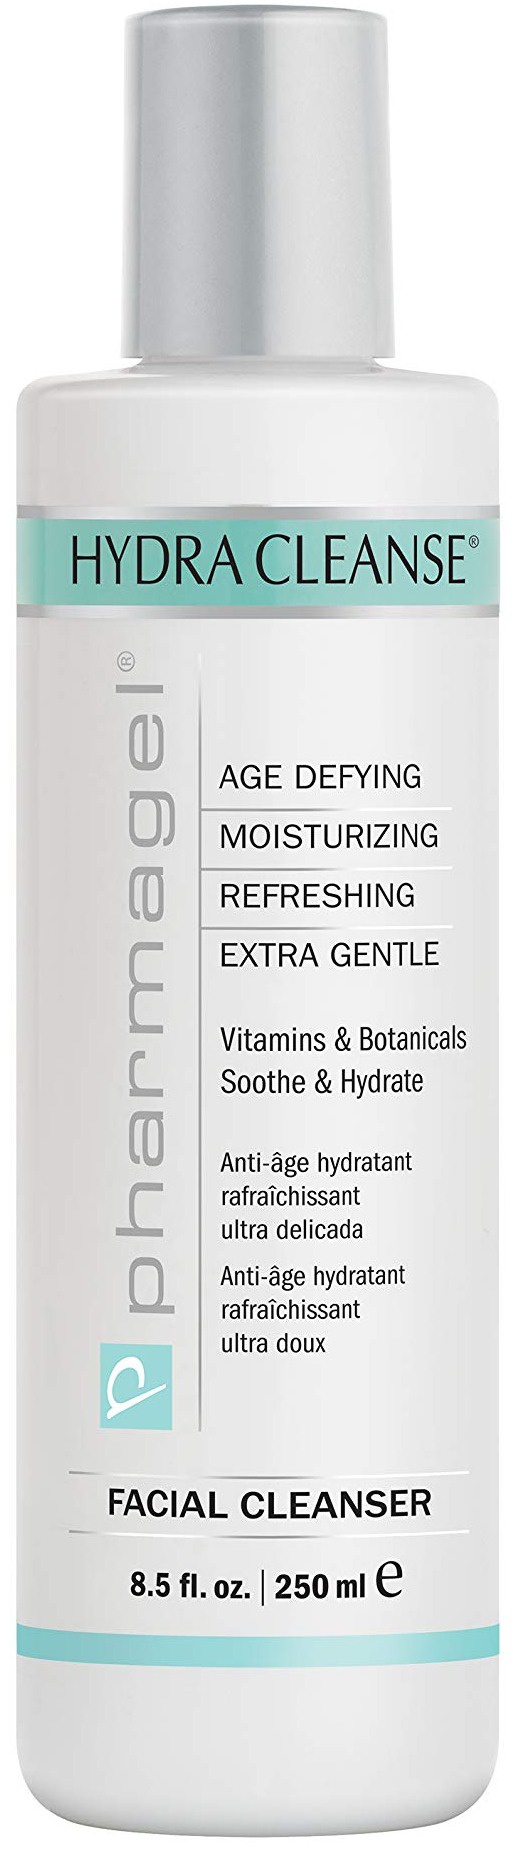 Pharmagel Age Defying Moisturizing Refreshing Extra Gentle Hydra Cleanse Facial Cleanser